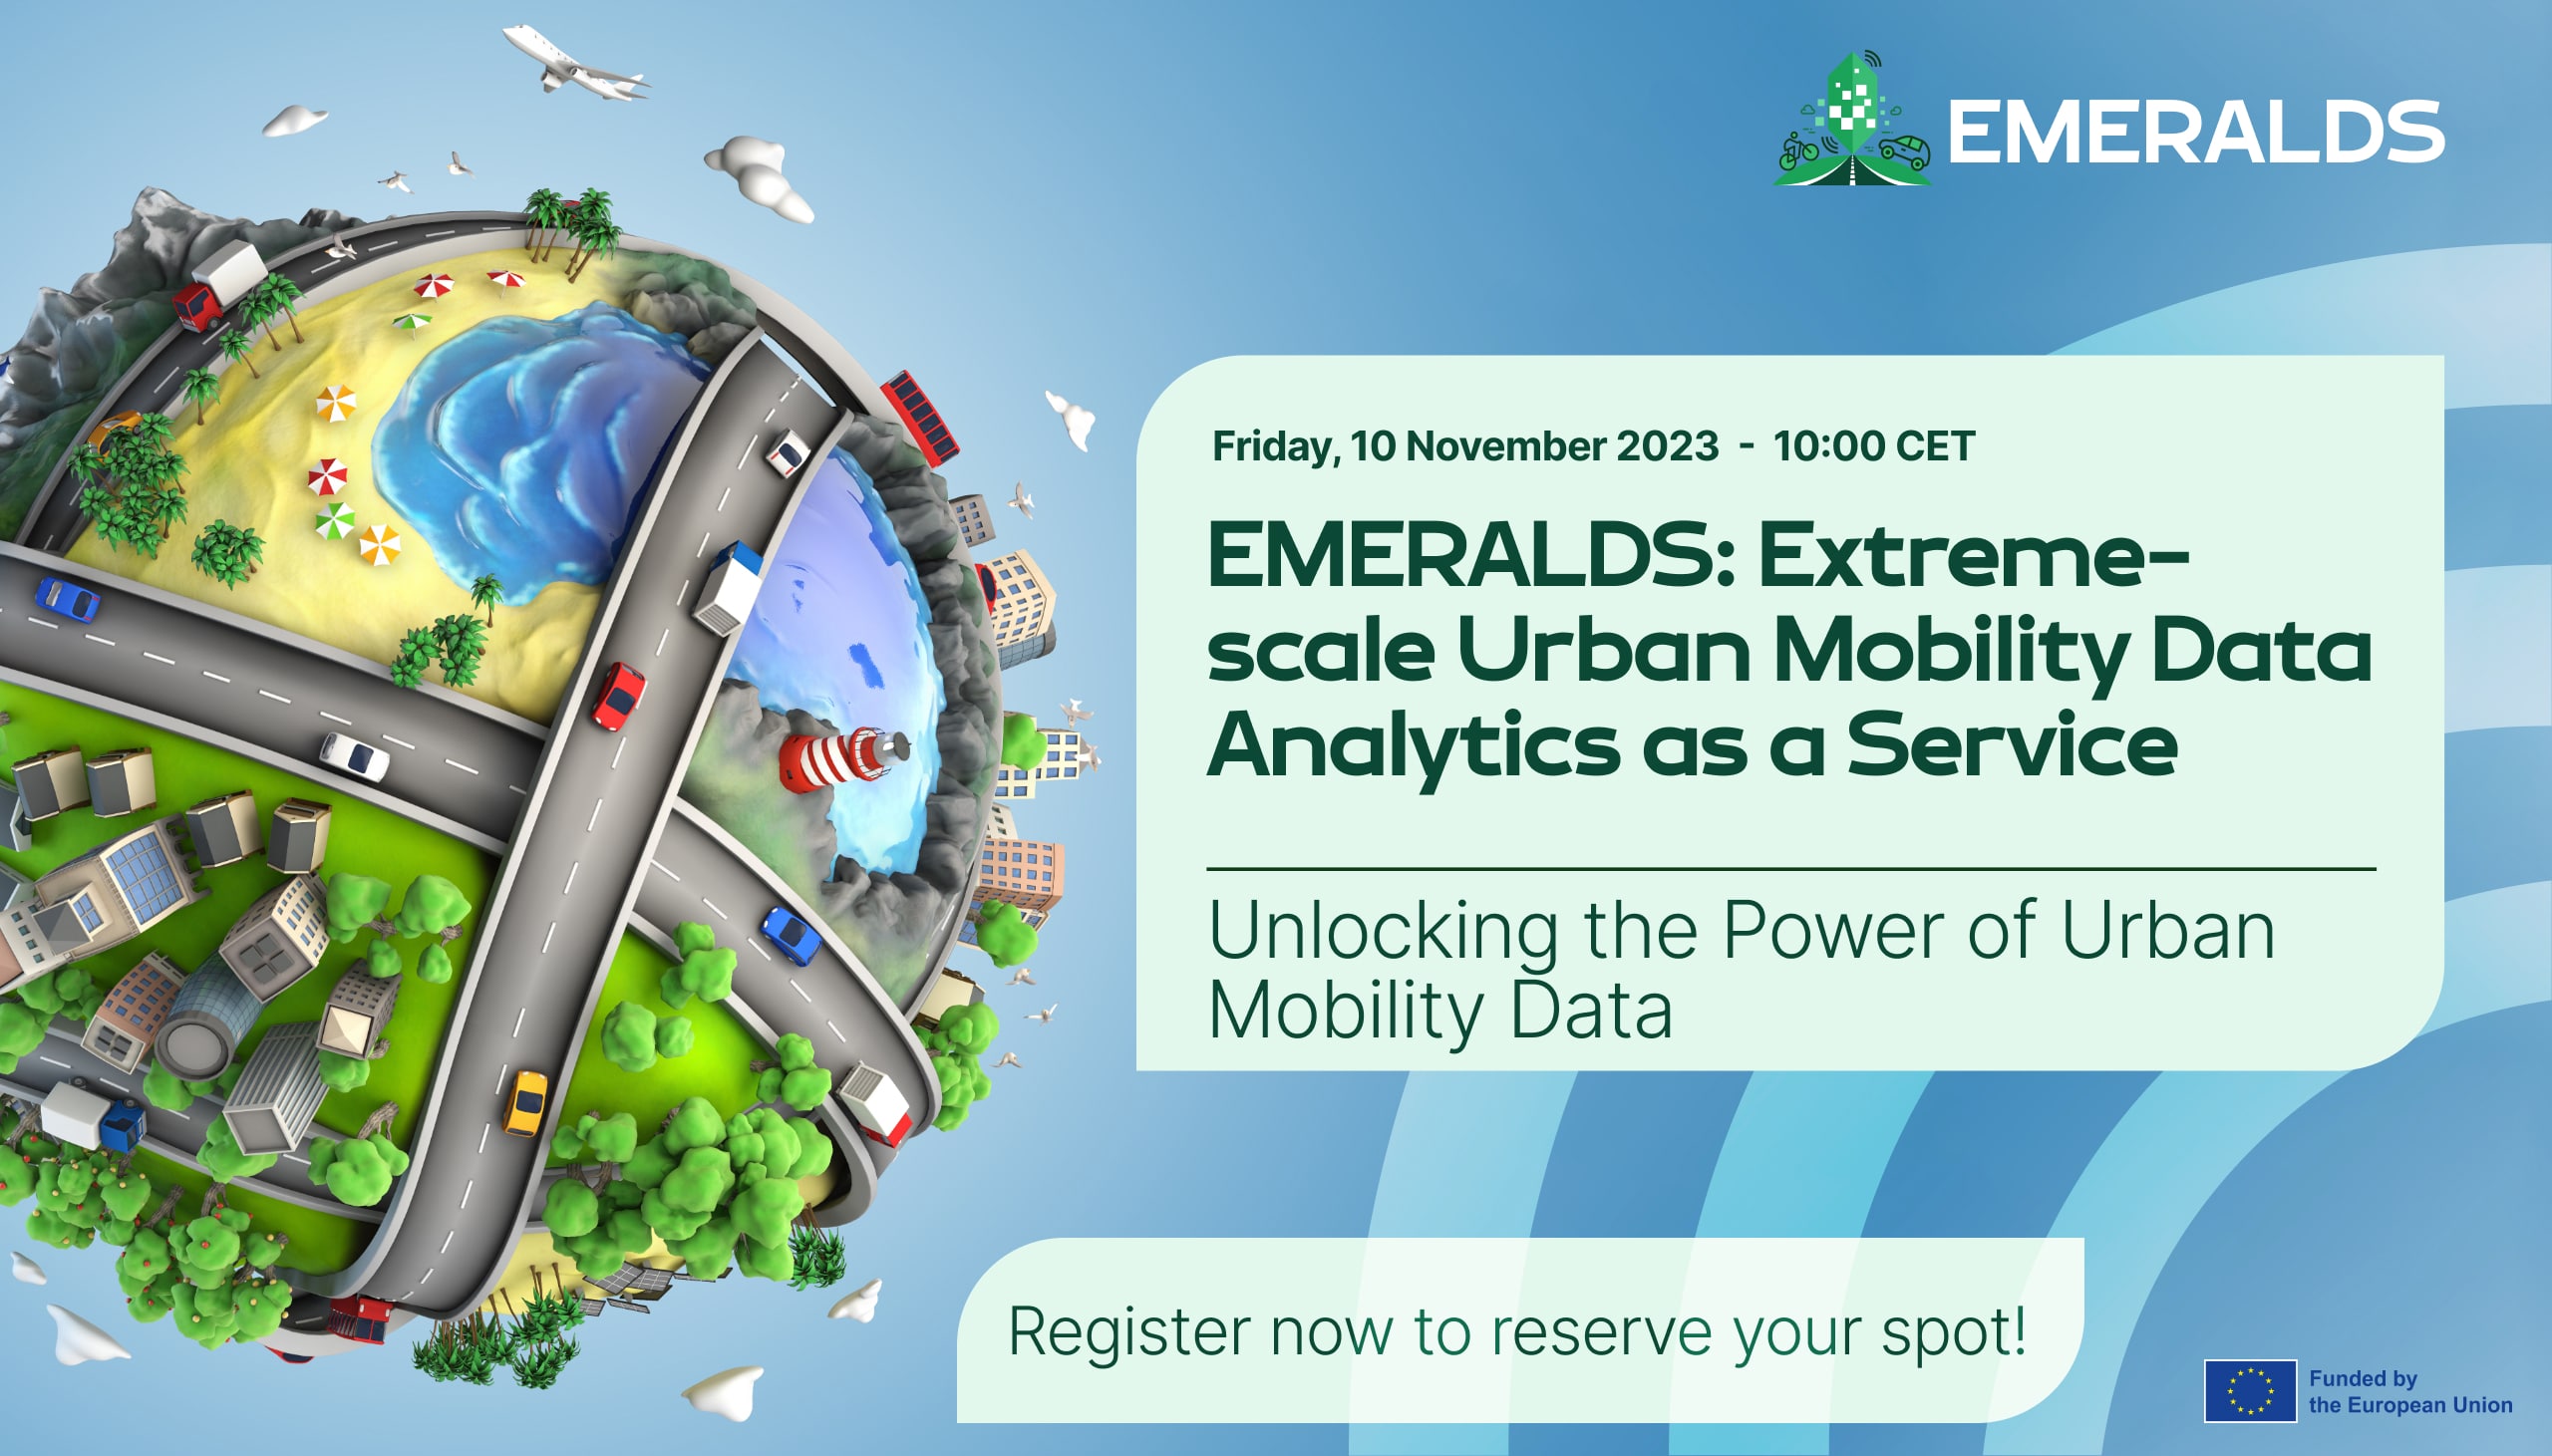 EMERALDS Webinar: Extreme-scale Urban Mobility Data Analytics as a Service